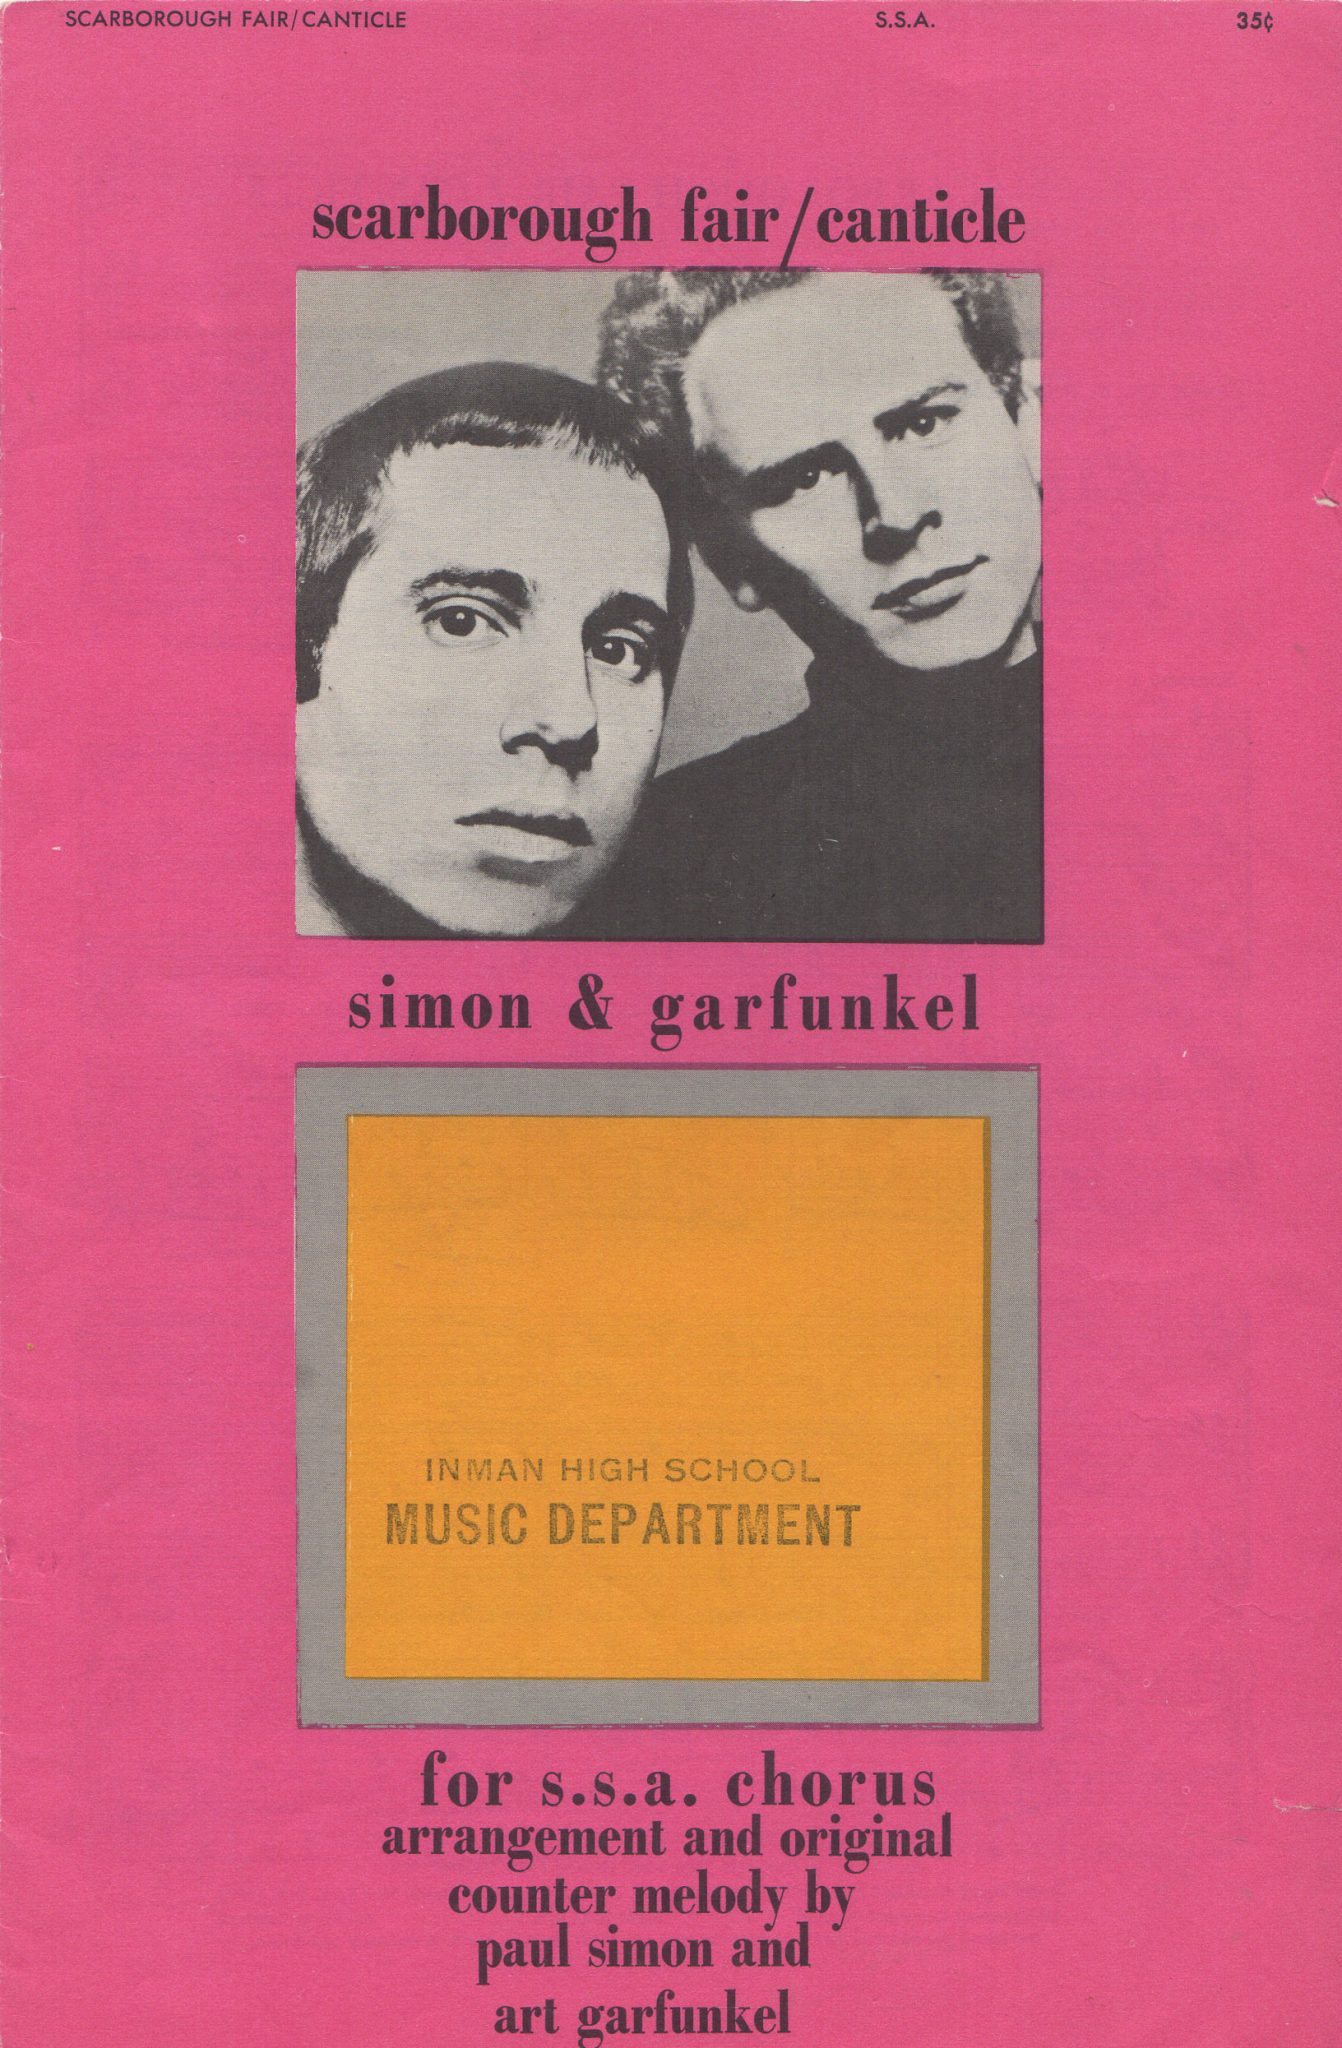 Performance: Scarborough Fair / Canticle by Simon and Garfunkel